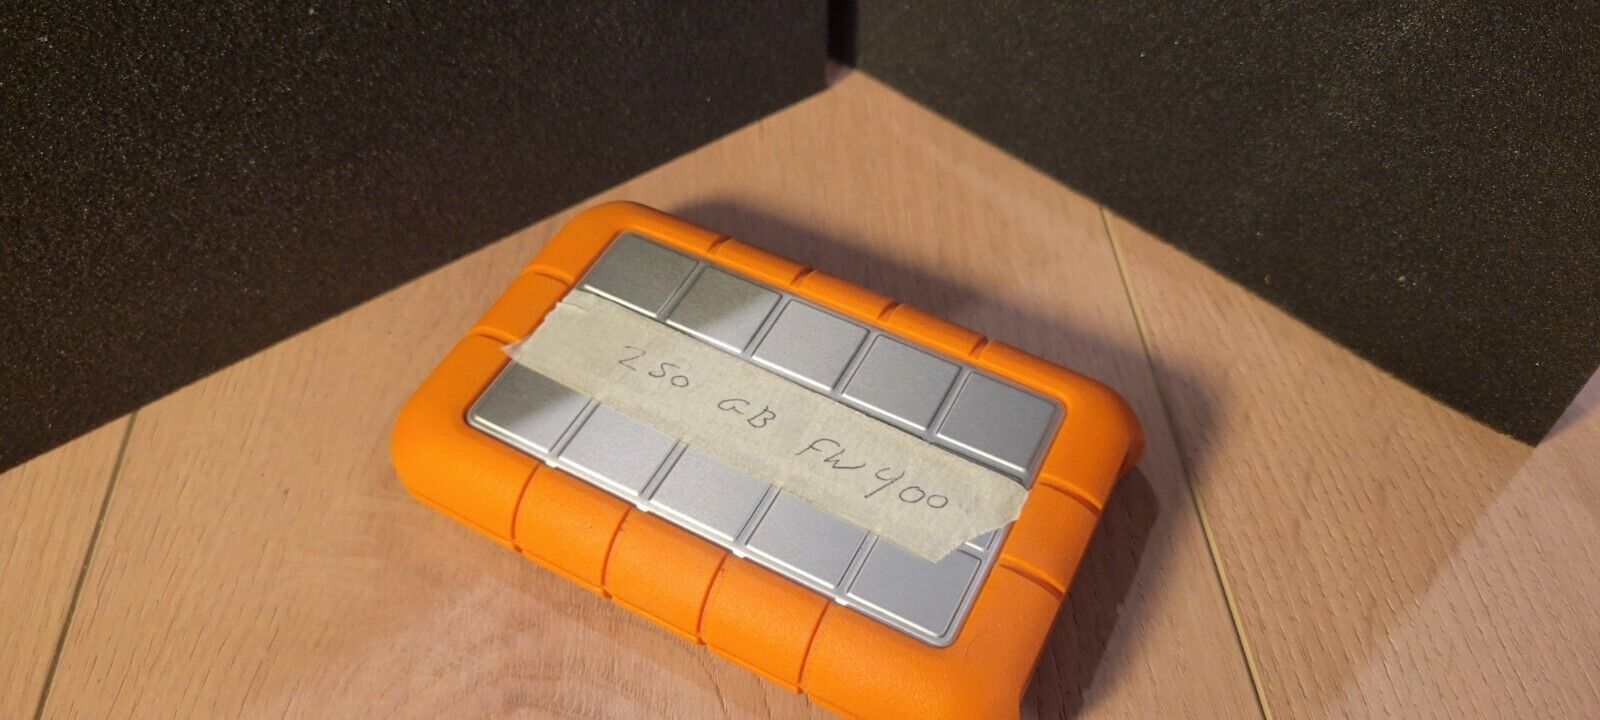 Used LACIE Rugged 250GB Firewire 400 only Drive - Tested - 